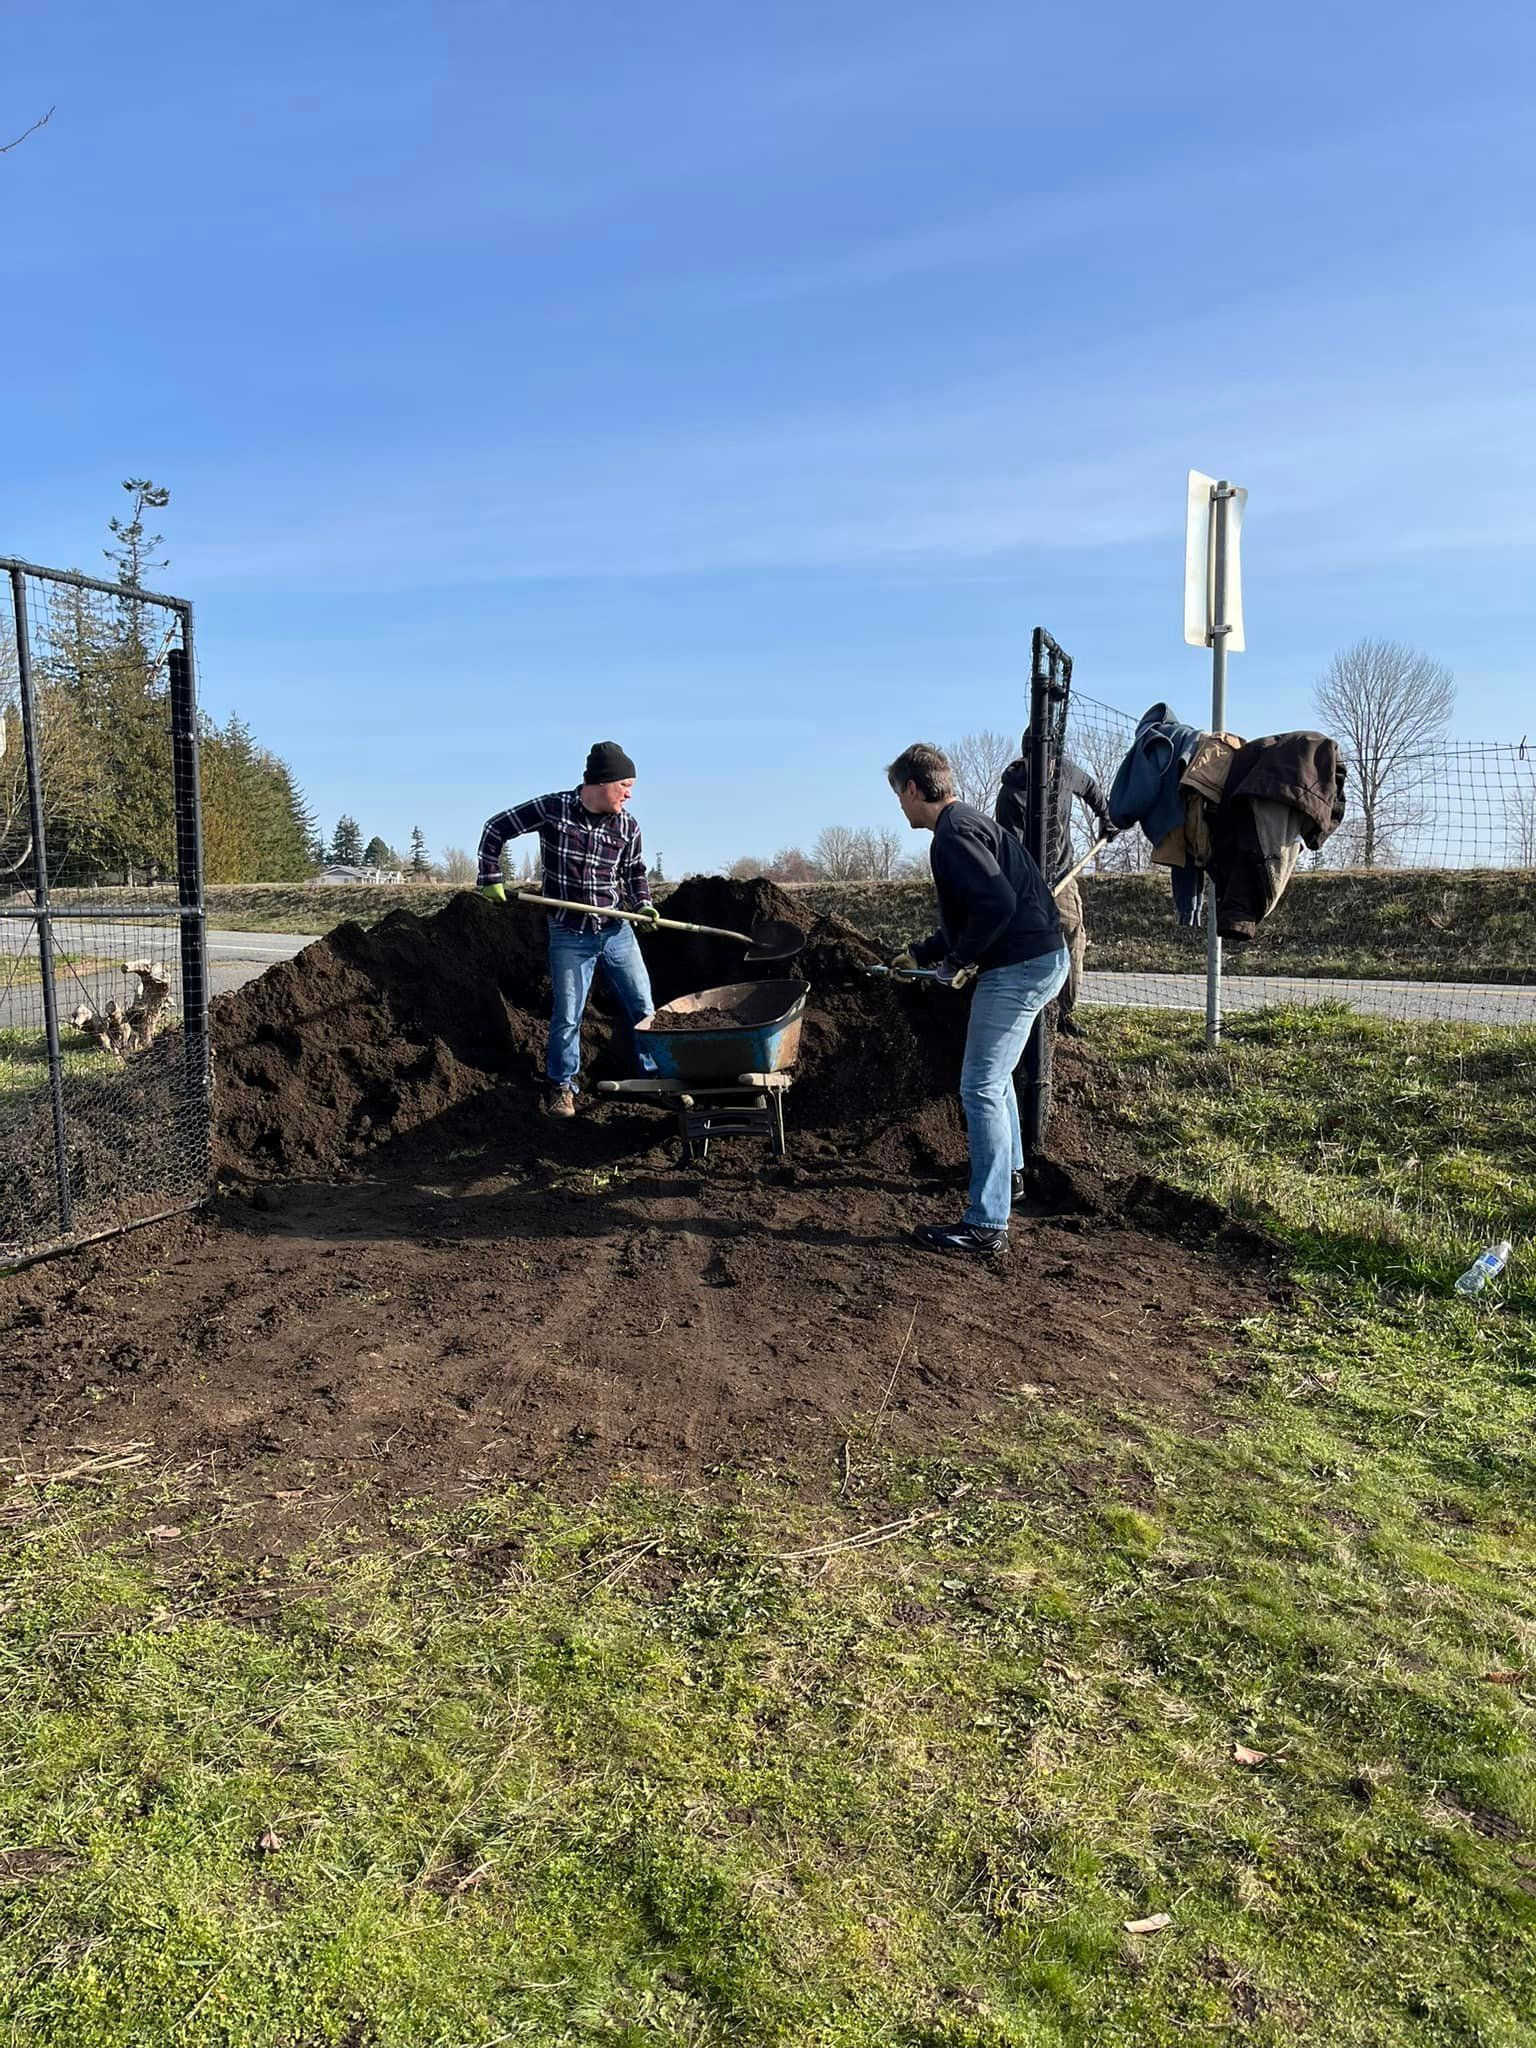 Two Superfeet volunteers shovel garden dirt during a work project at the Ferndale Community Garden